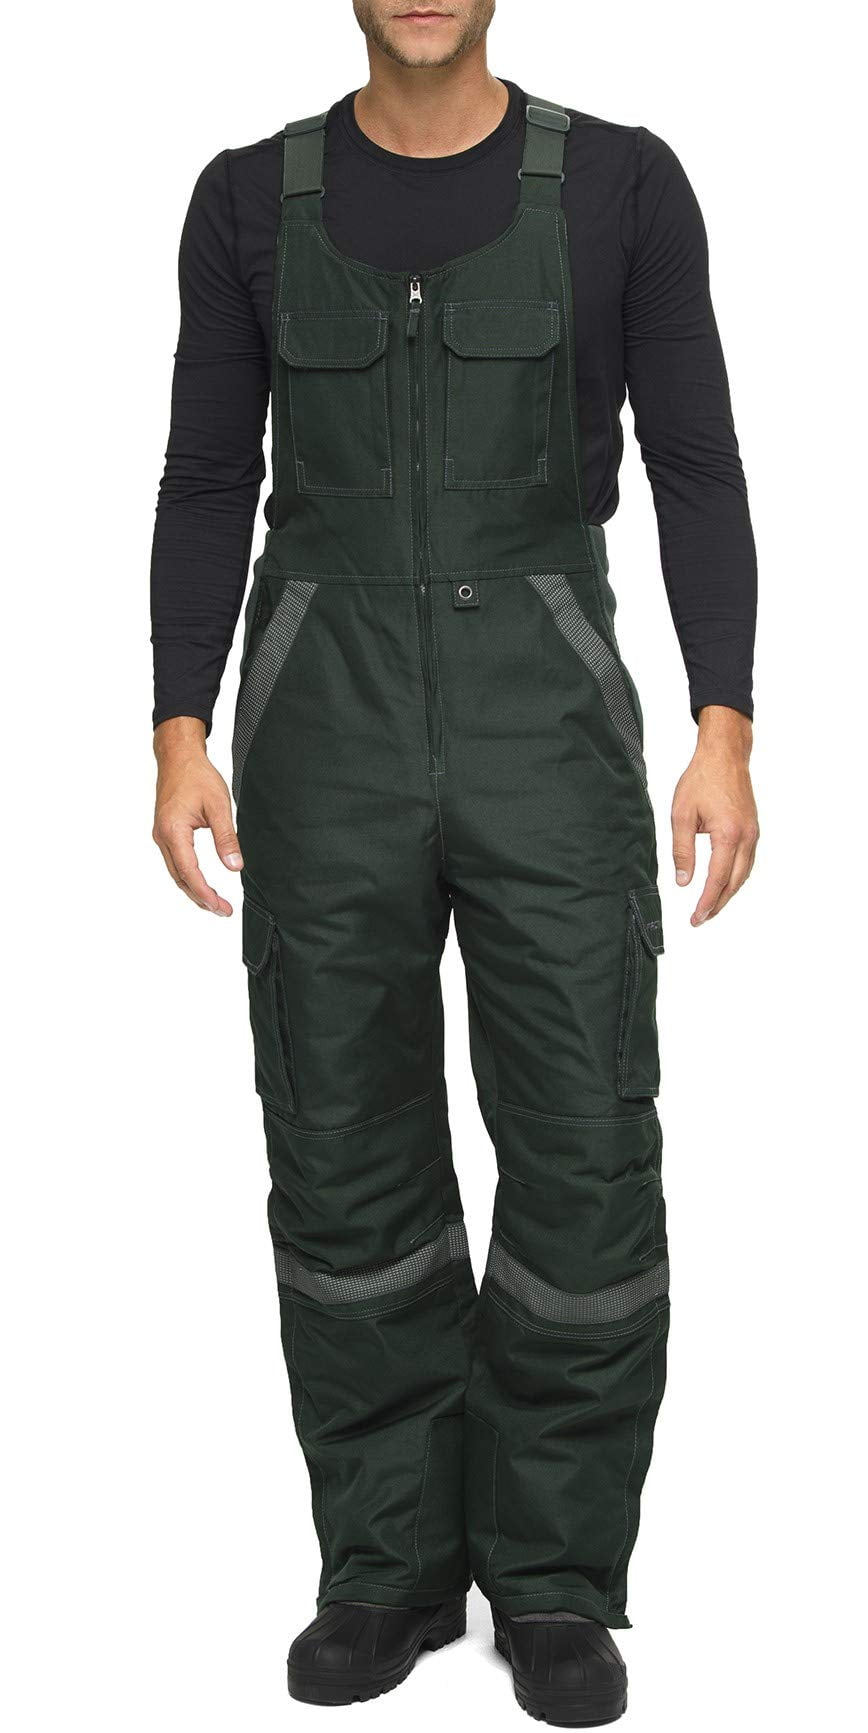 Arctix Men's Tundra Ballistic Bib Overalls with Added Visibility, Packers  Green, XX-Large (44-46W 36L)並行輸入